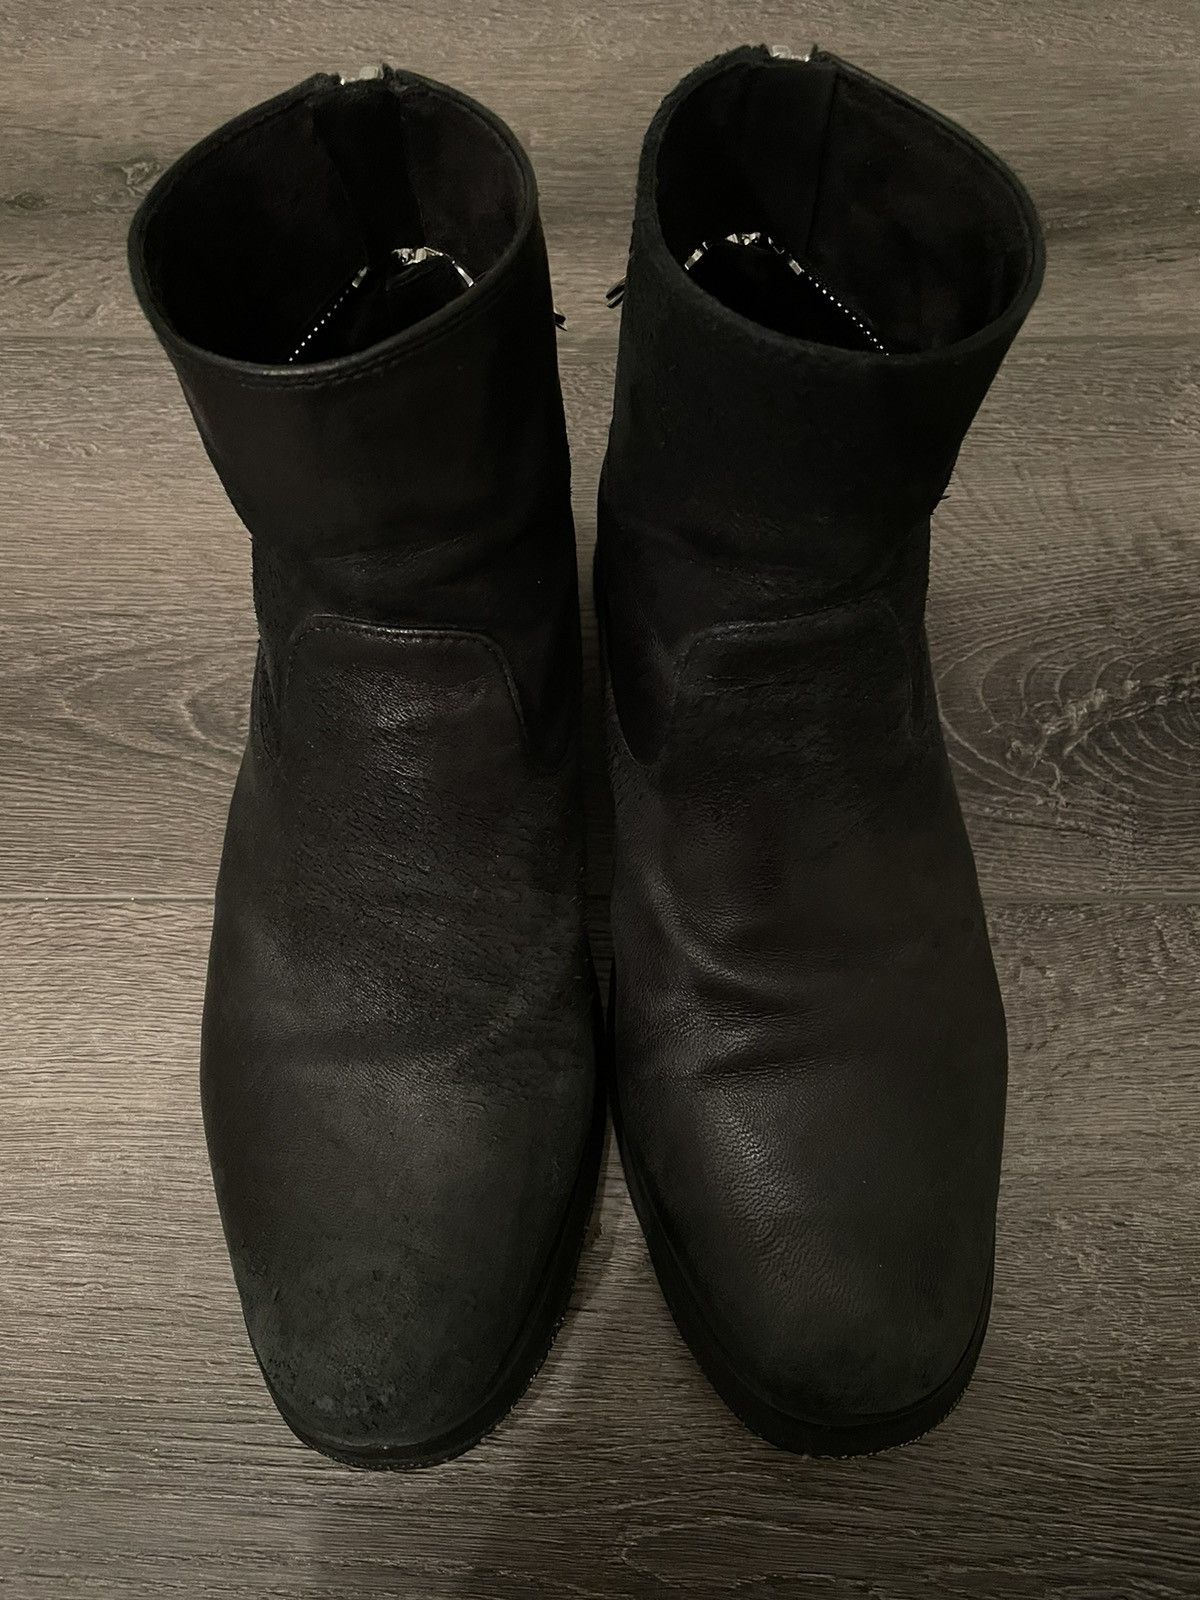 Japanese Brand 14th Addiction AW19 Blistered Cross Zip Boots | Grailed